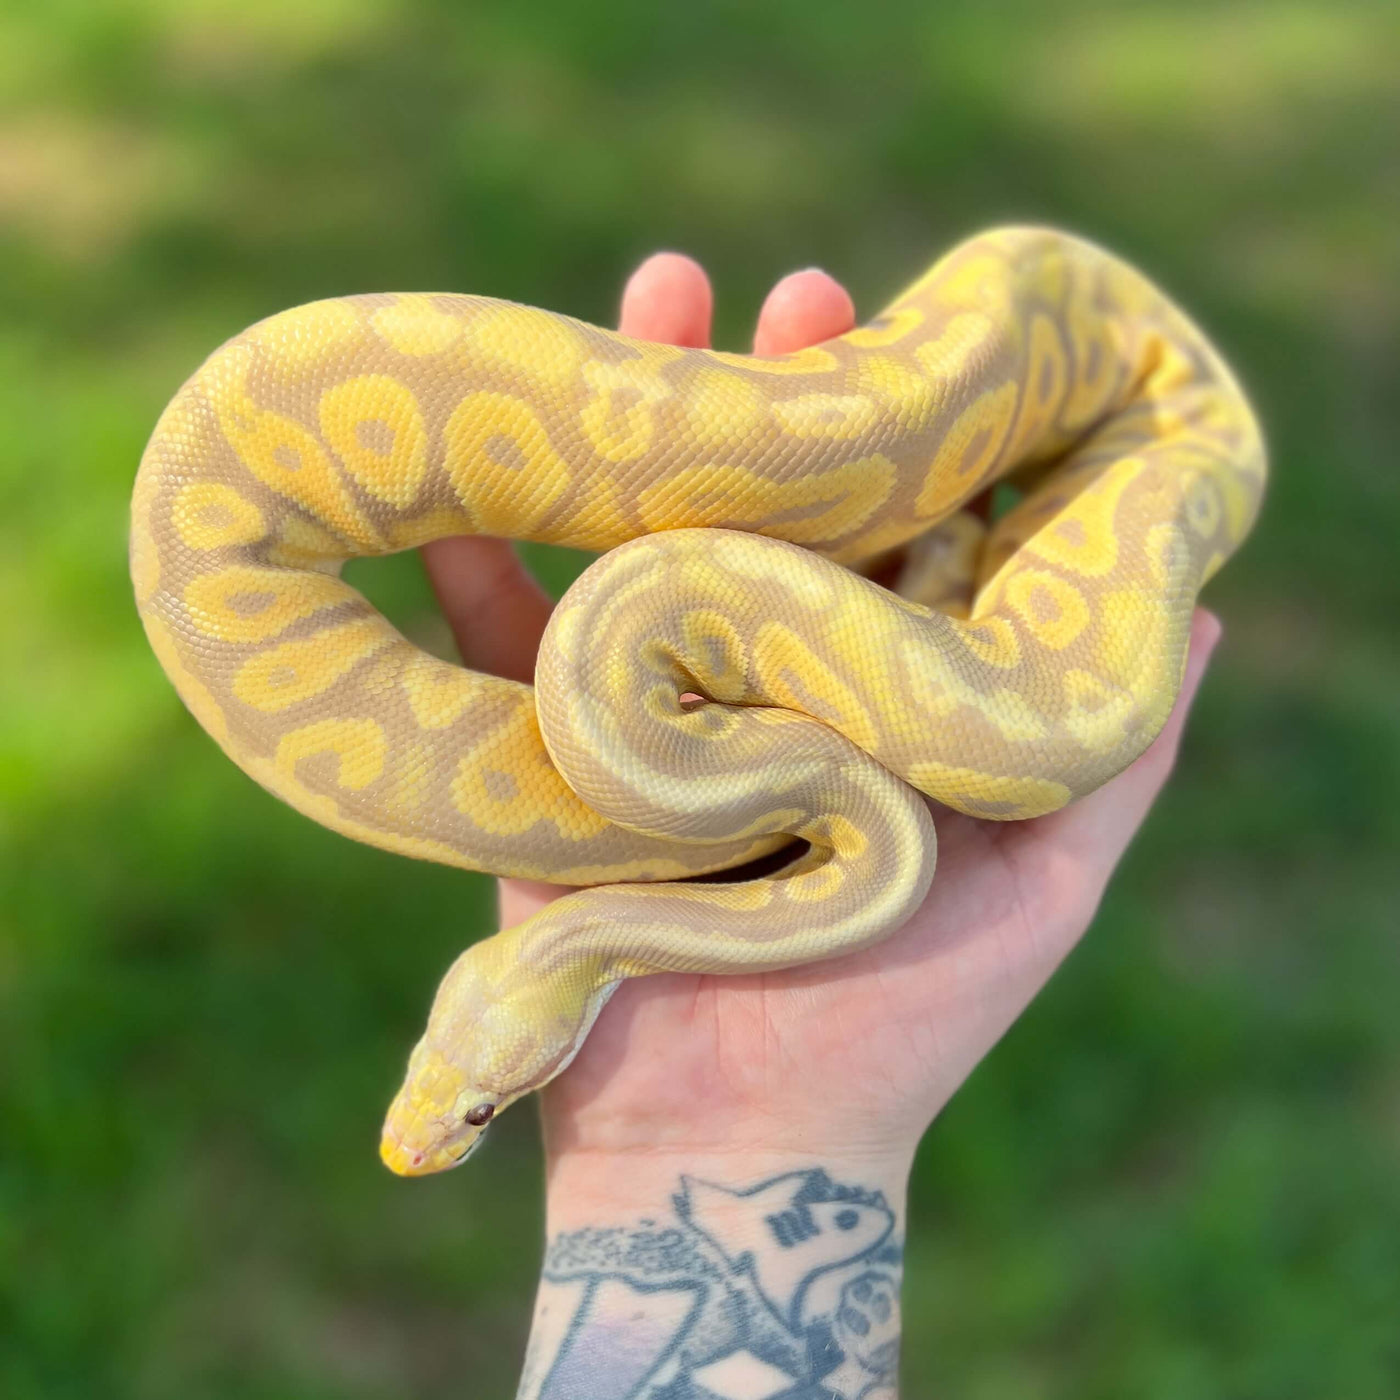 candy pewter ball python for sale online at cheap prices, buy ball pythons near me